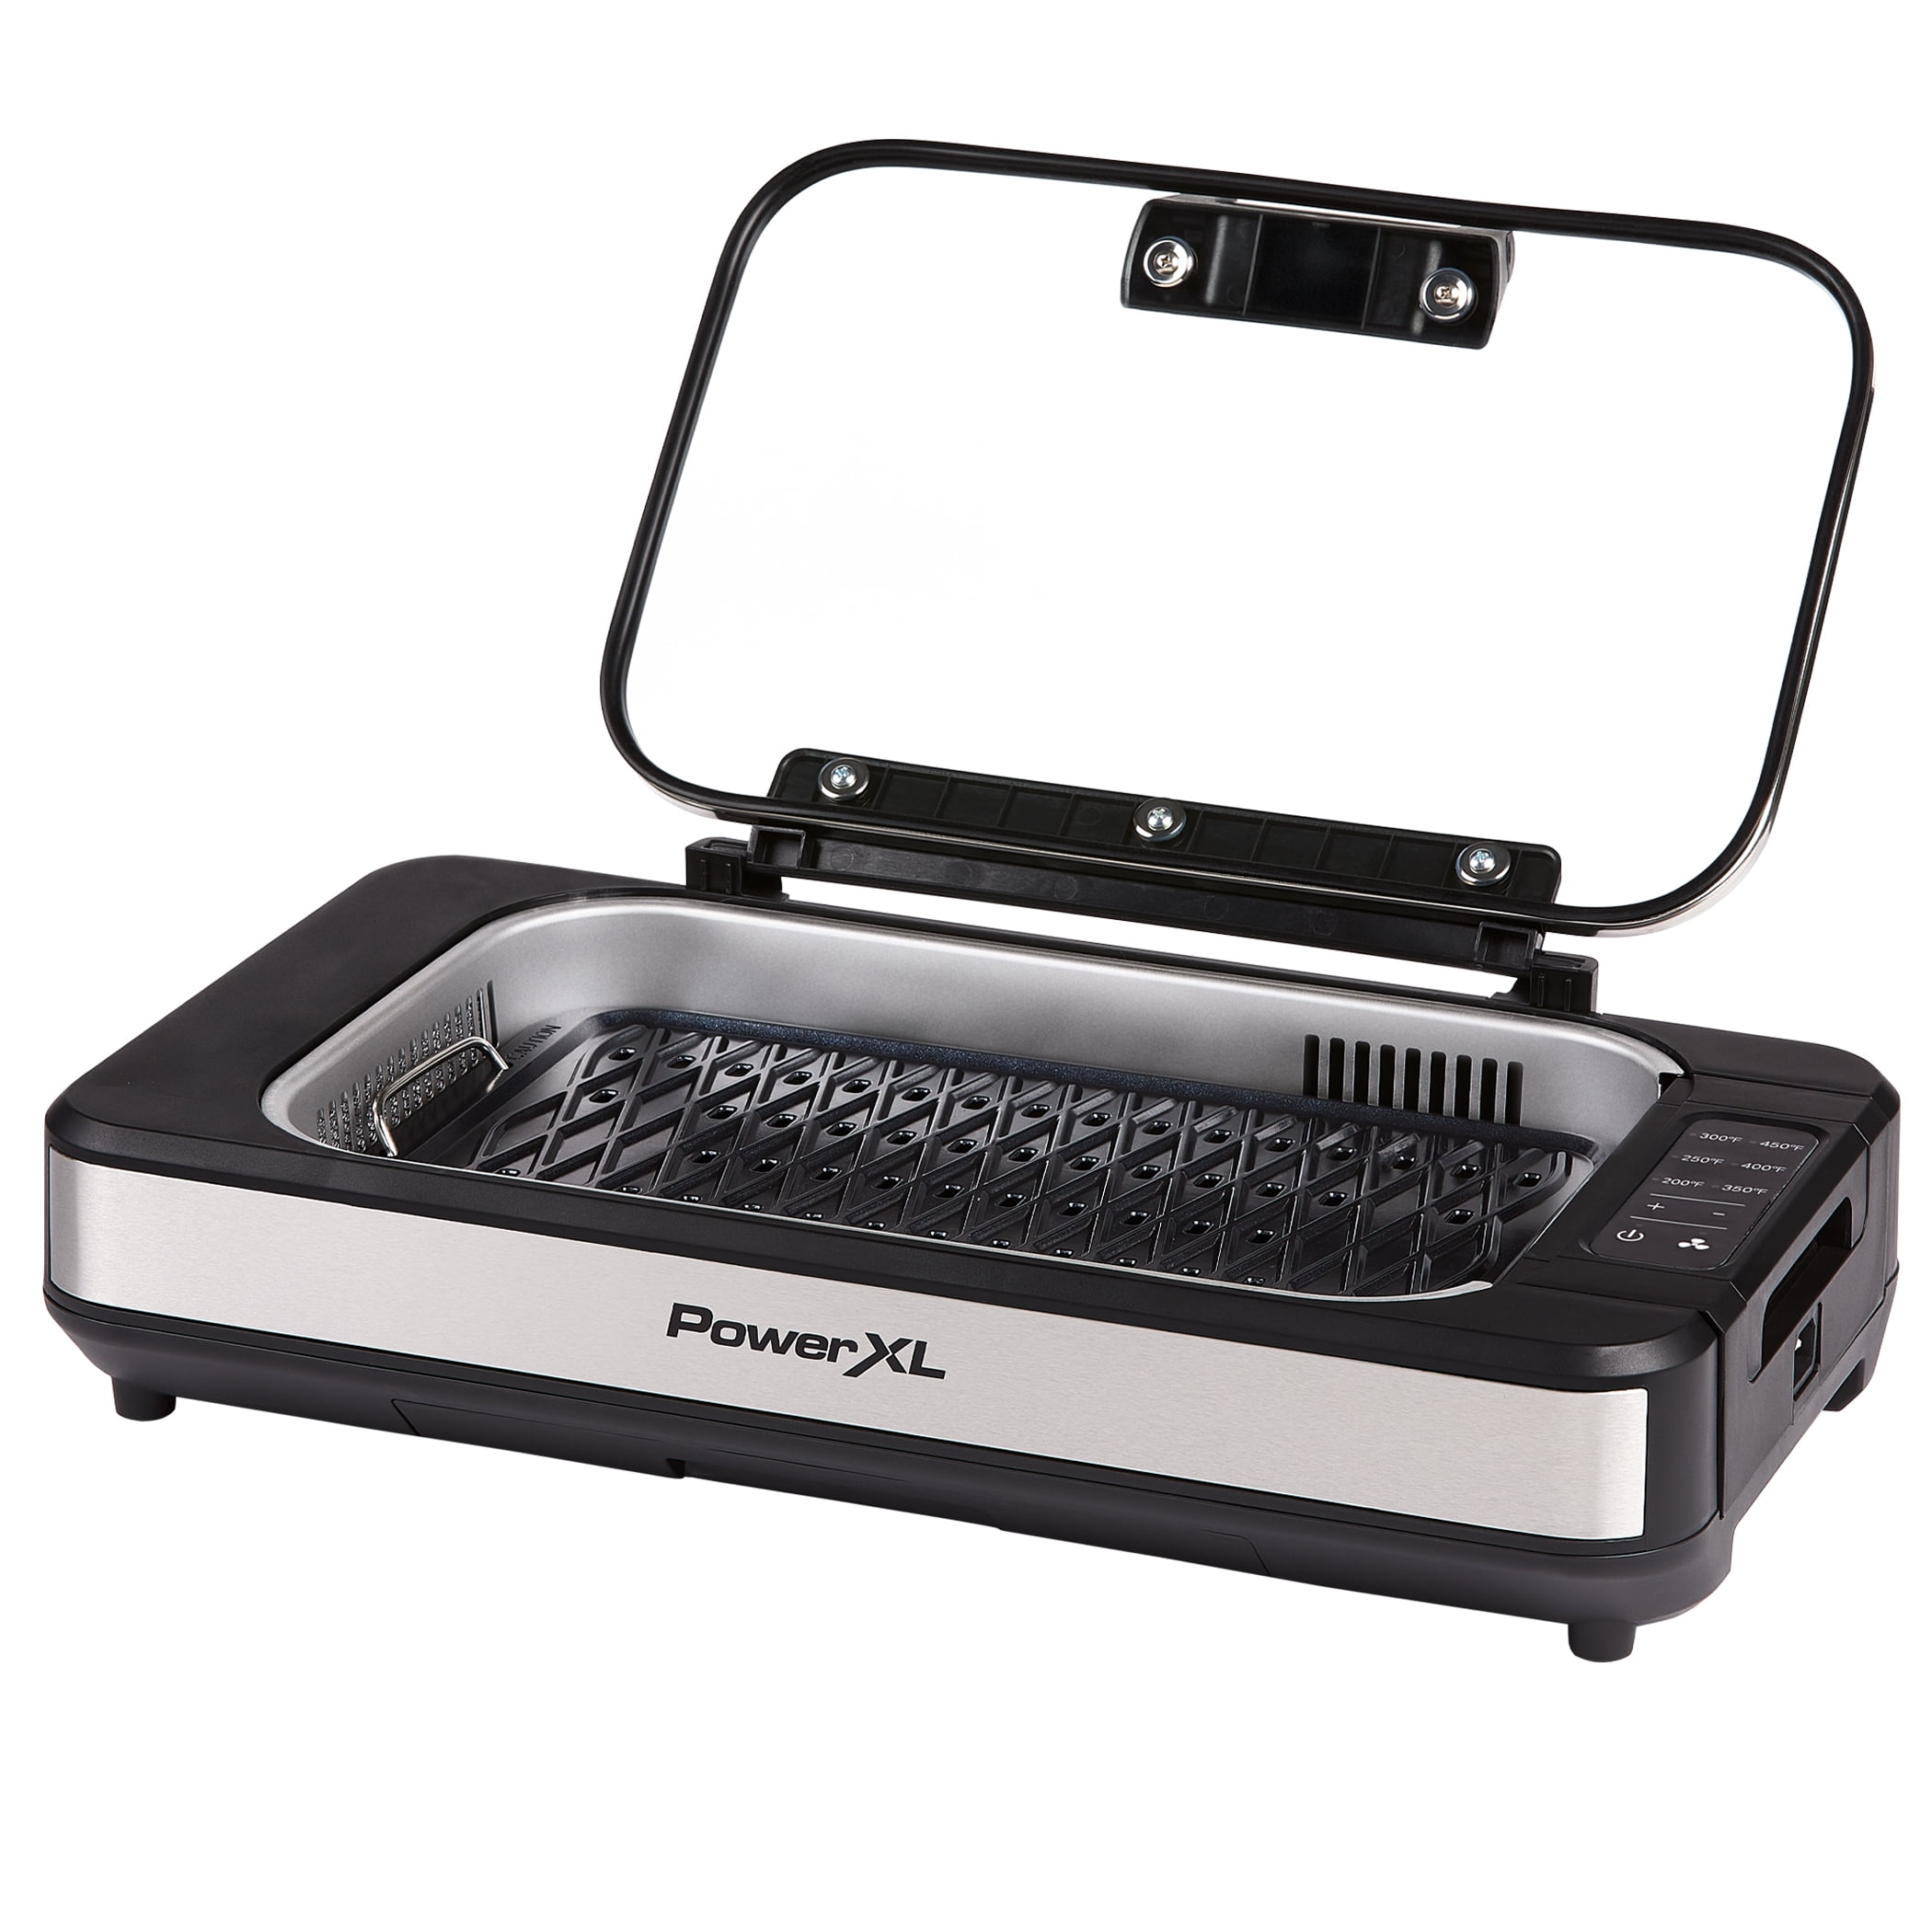 PowerXL 1500W Smokeless Grill Pro with Griddle Plate used K54319, Red